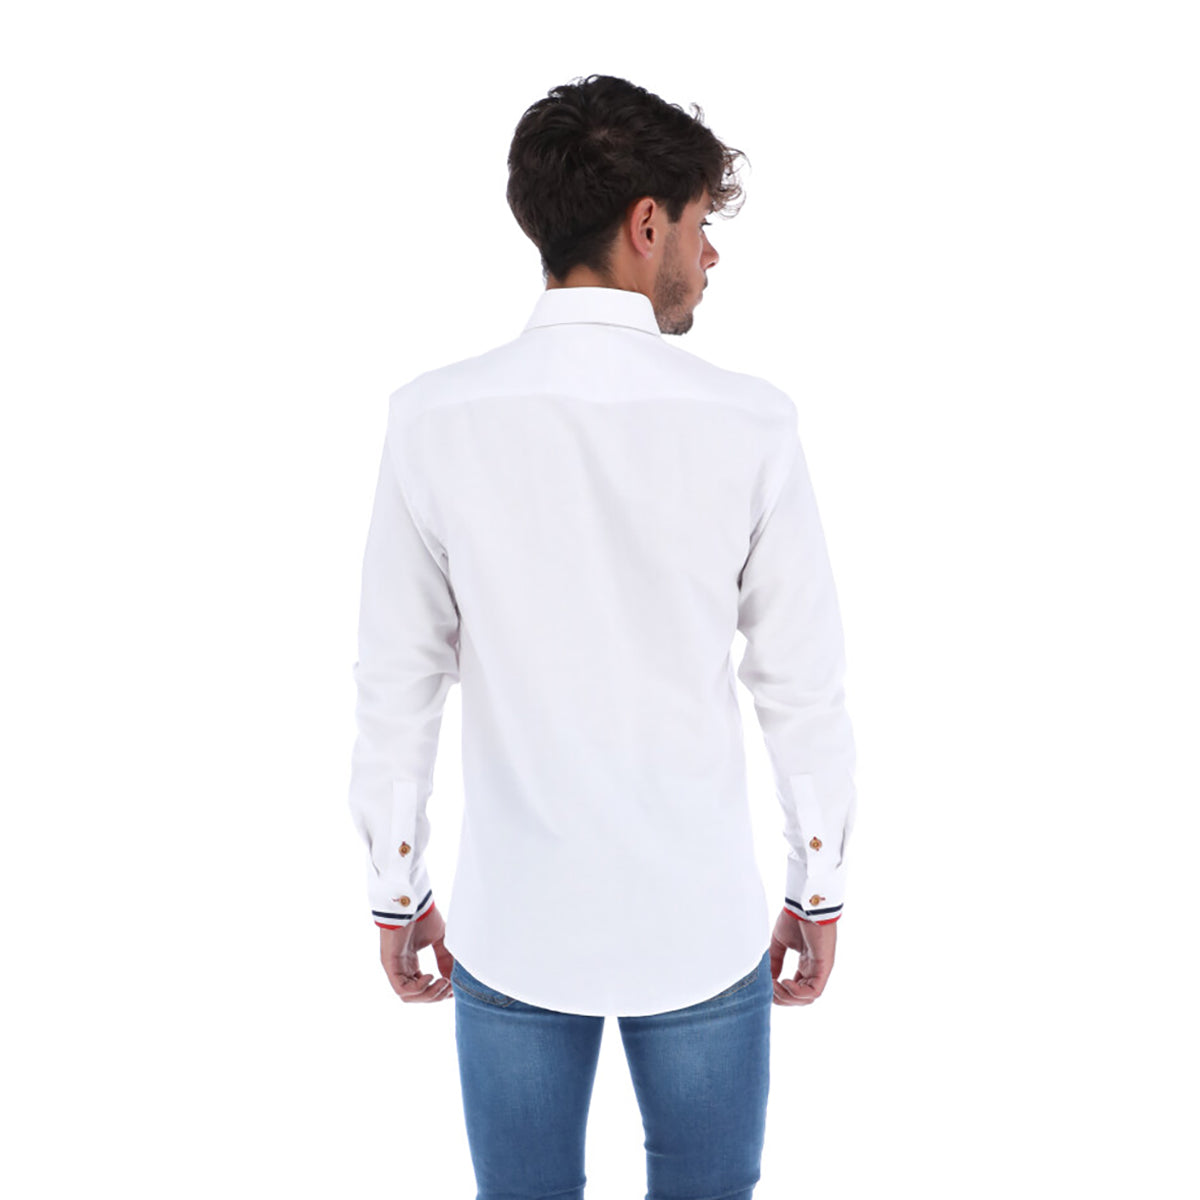 Men's Solid Long Sleeve Button Down Shirt White